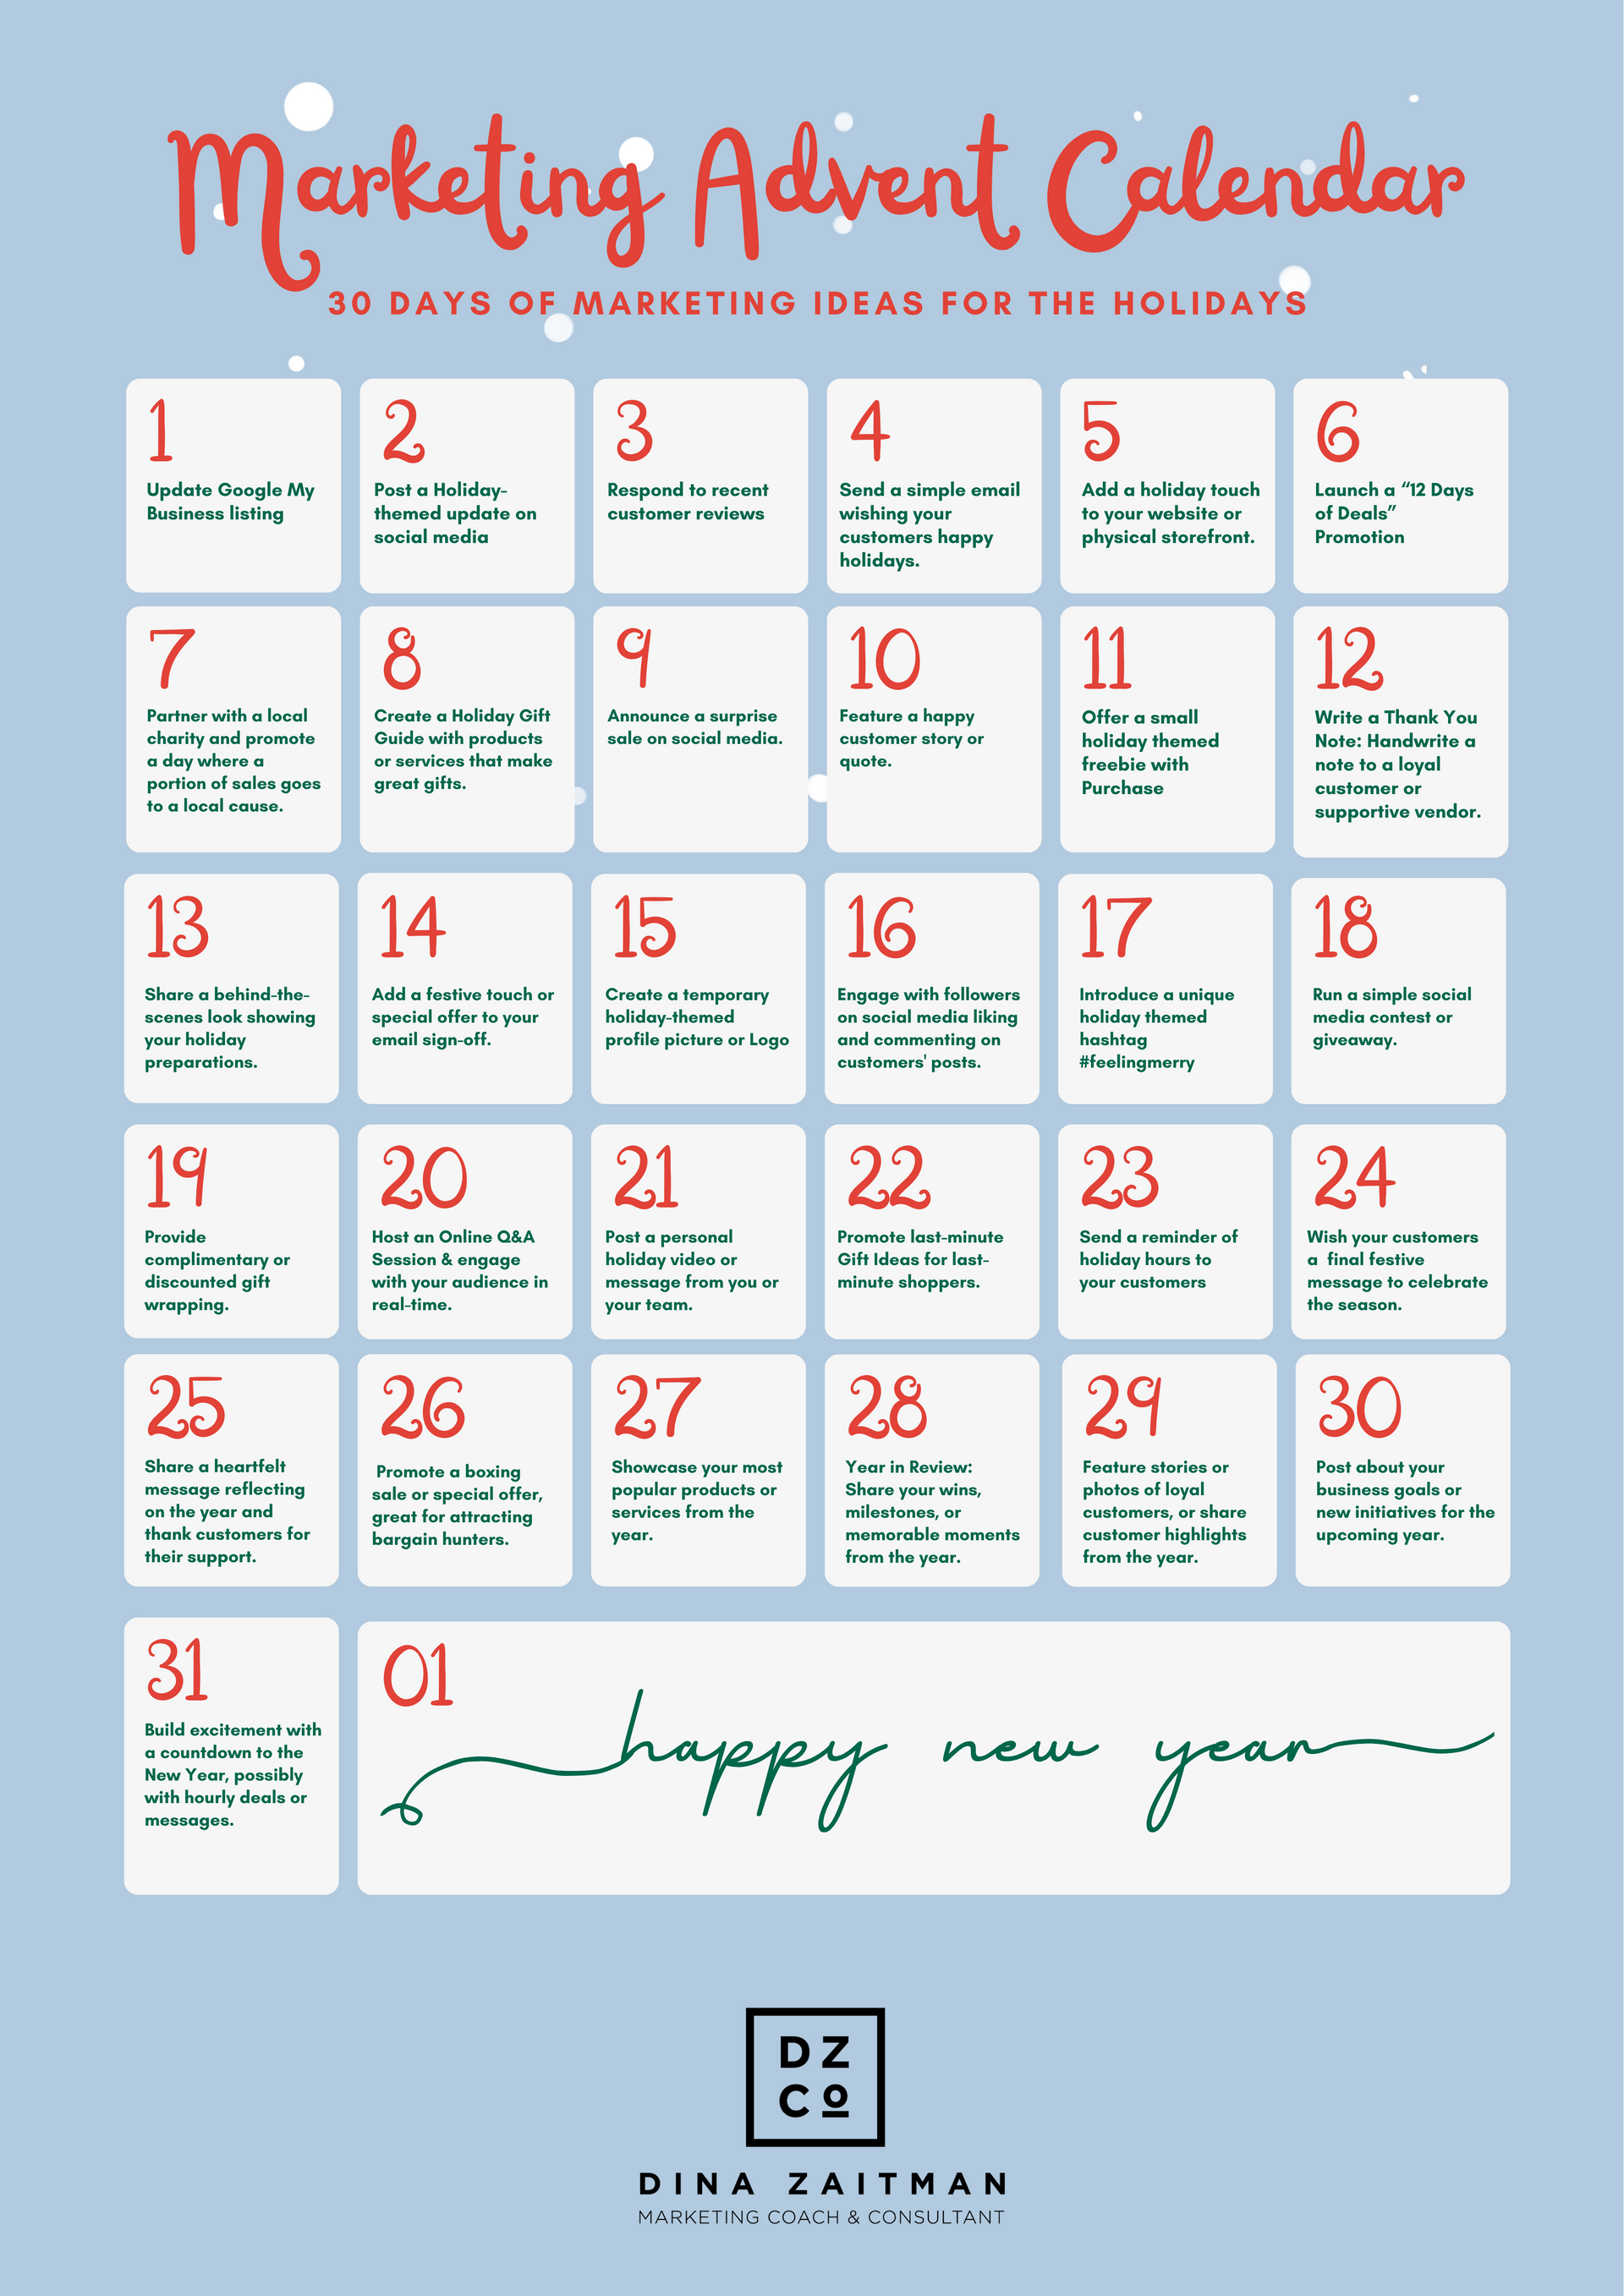 Marketing Advent Calendar for Small Business Owners